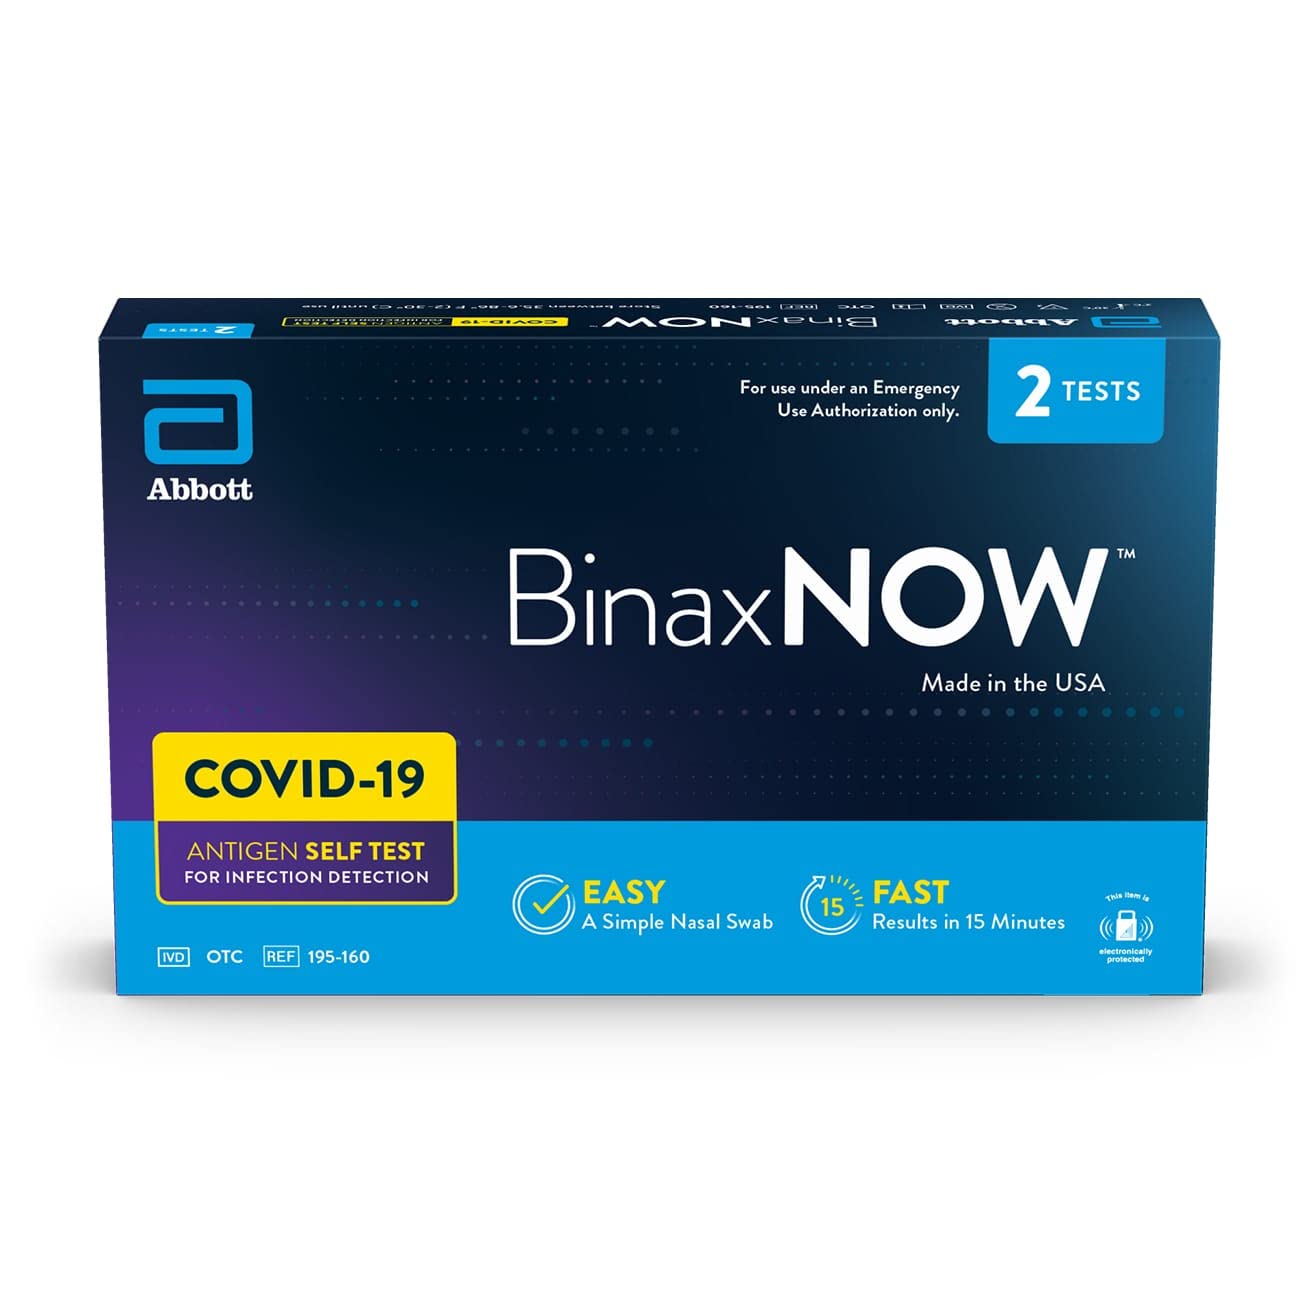 BinaxNOW COVID‐19 Antigen Self Test, 1 Pack, Double, 2-count, At Home COVID-19 Test, 2 Tests - image 1 of 12